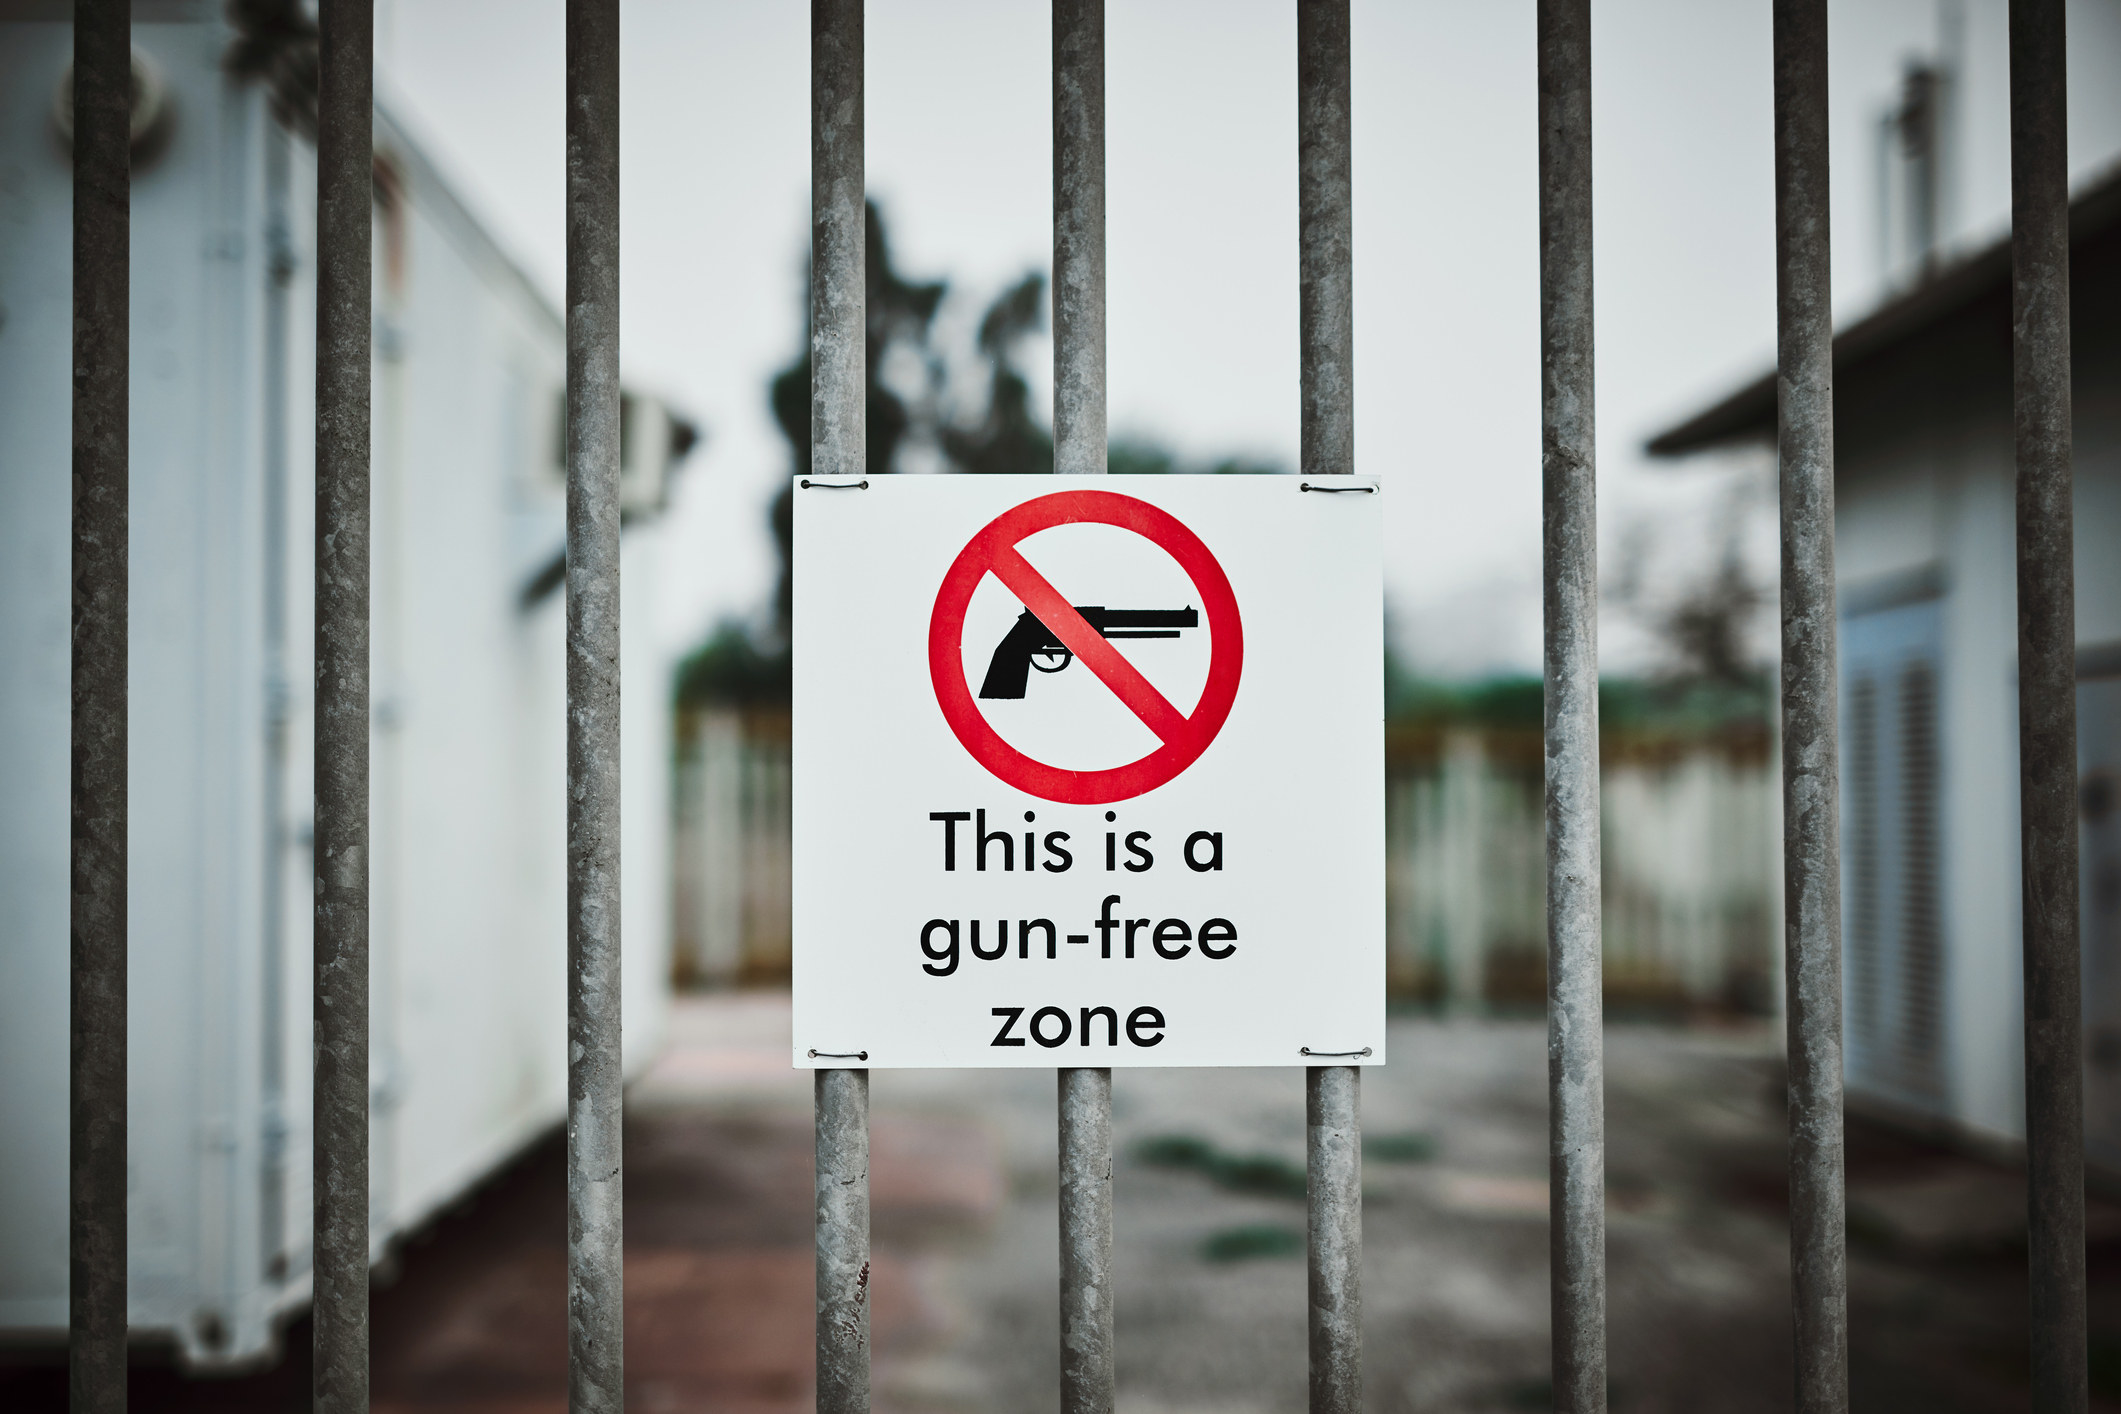 Sign on a fence: This is a gun-free zone